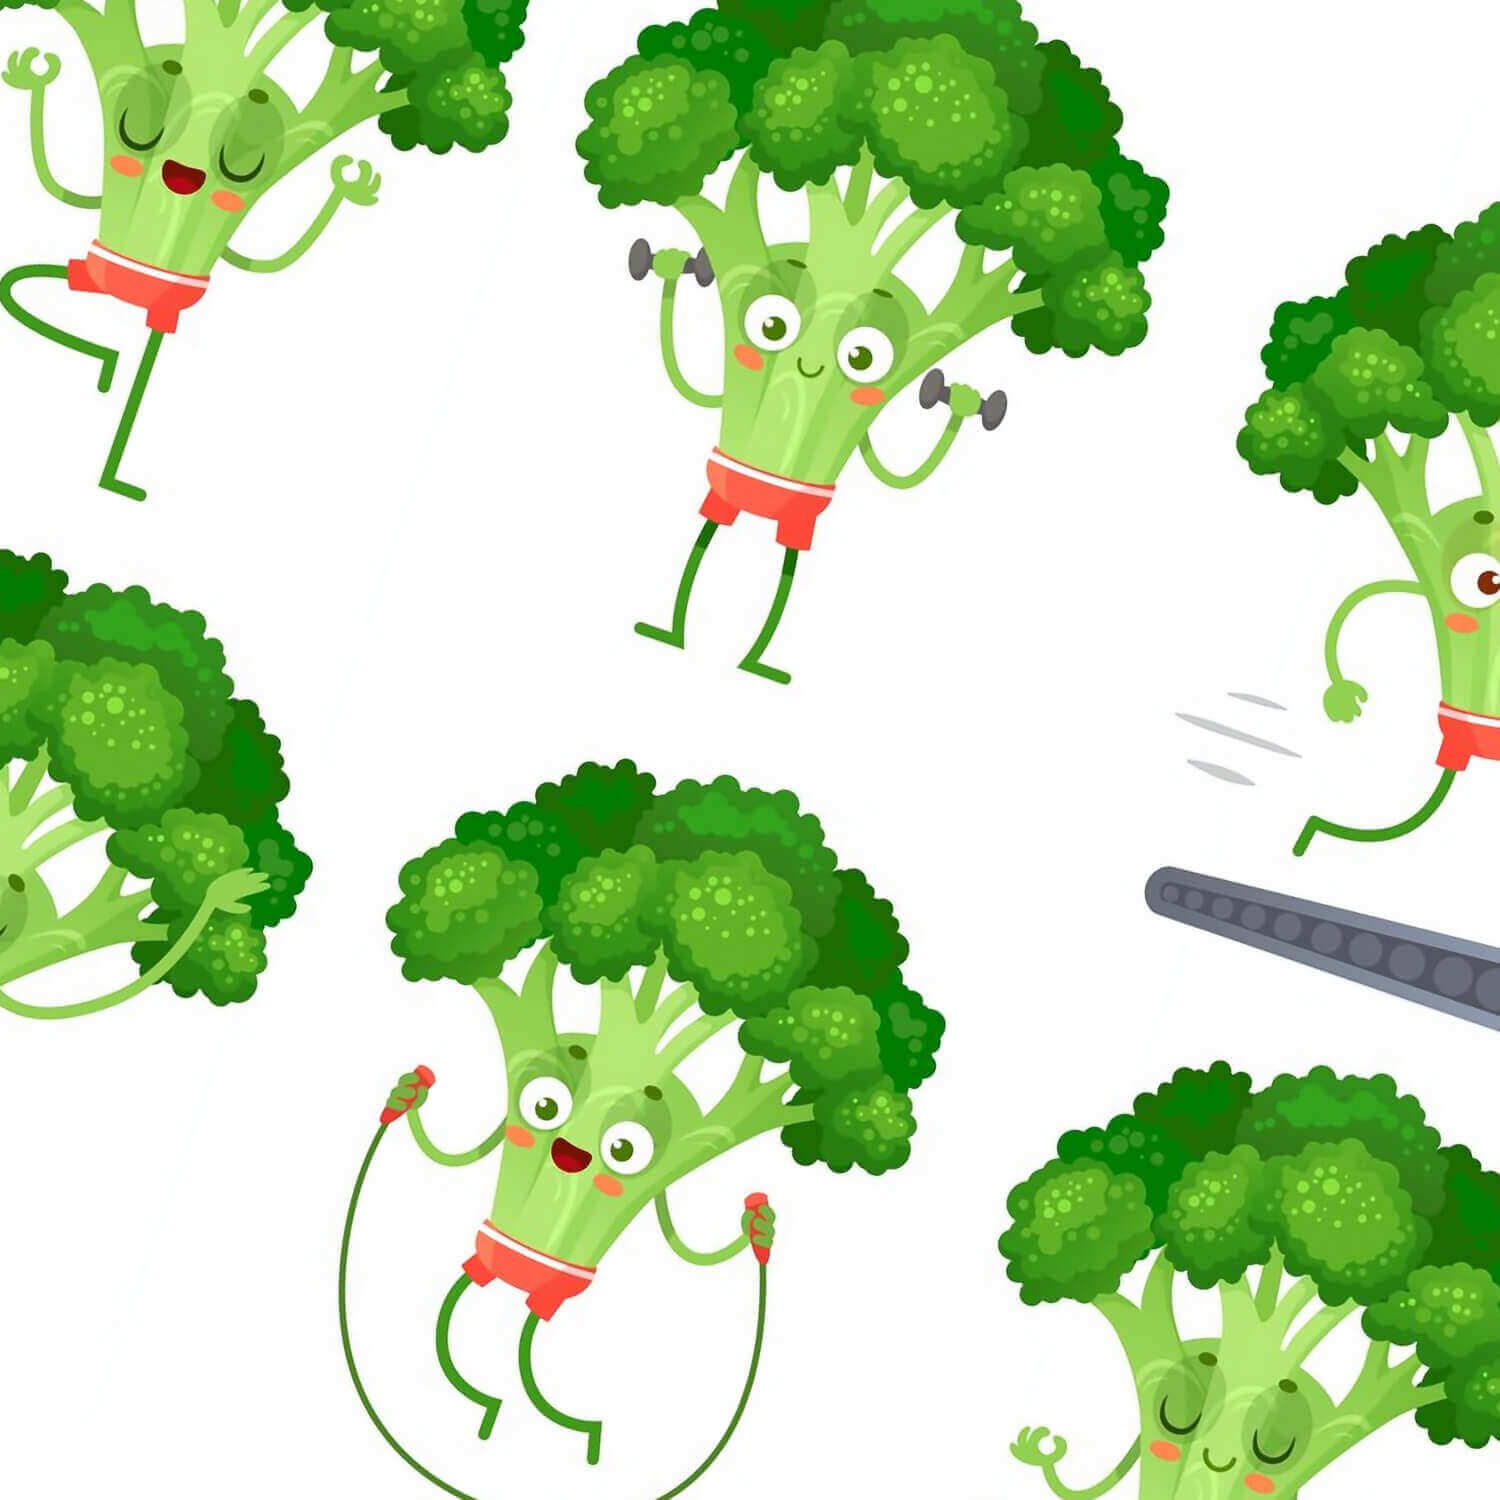 Broccoli are engaged in sports and meditation.